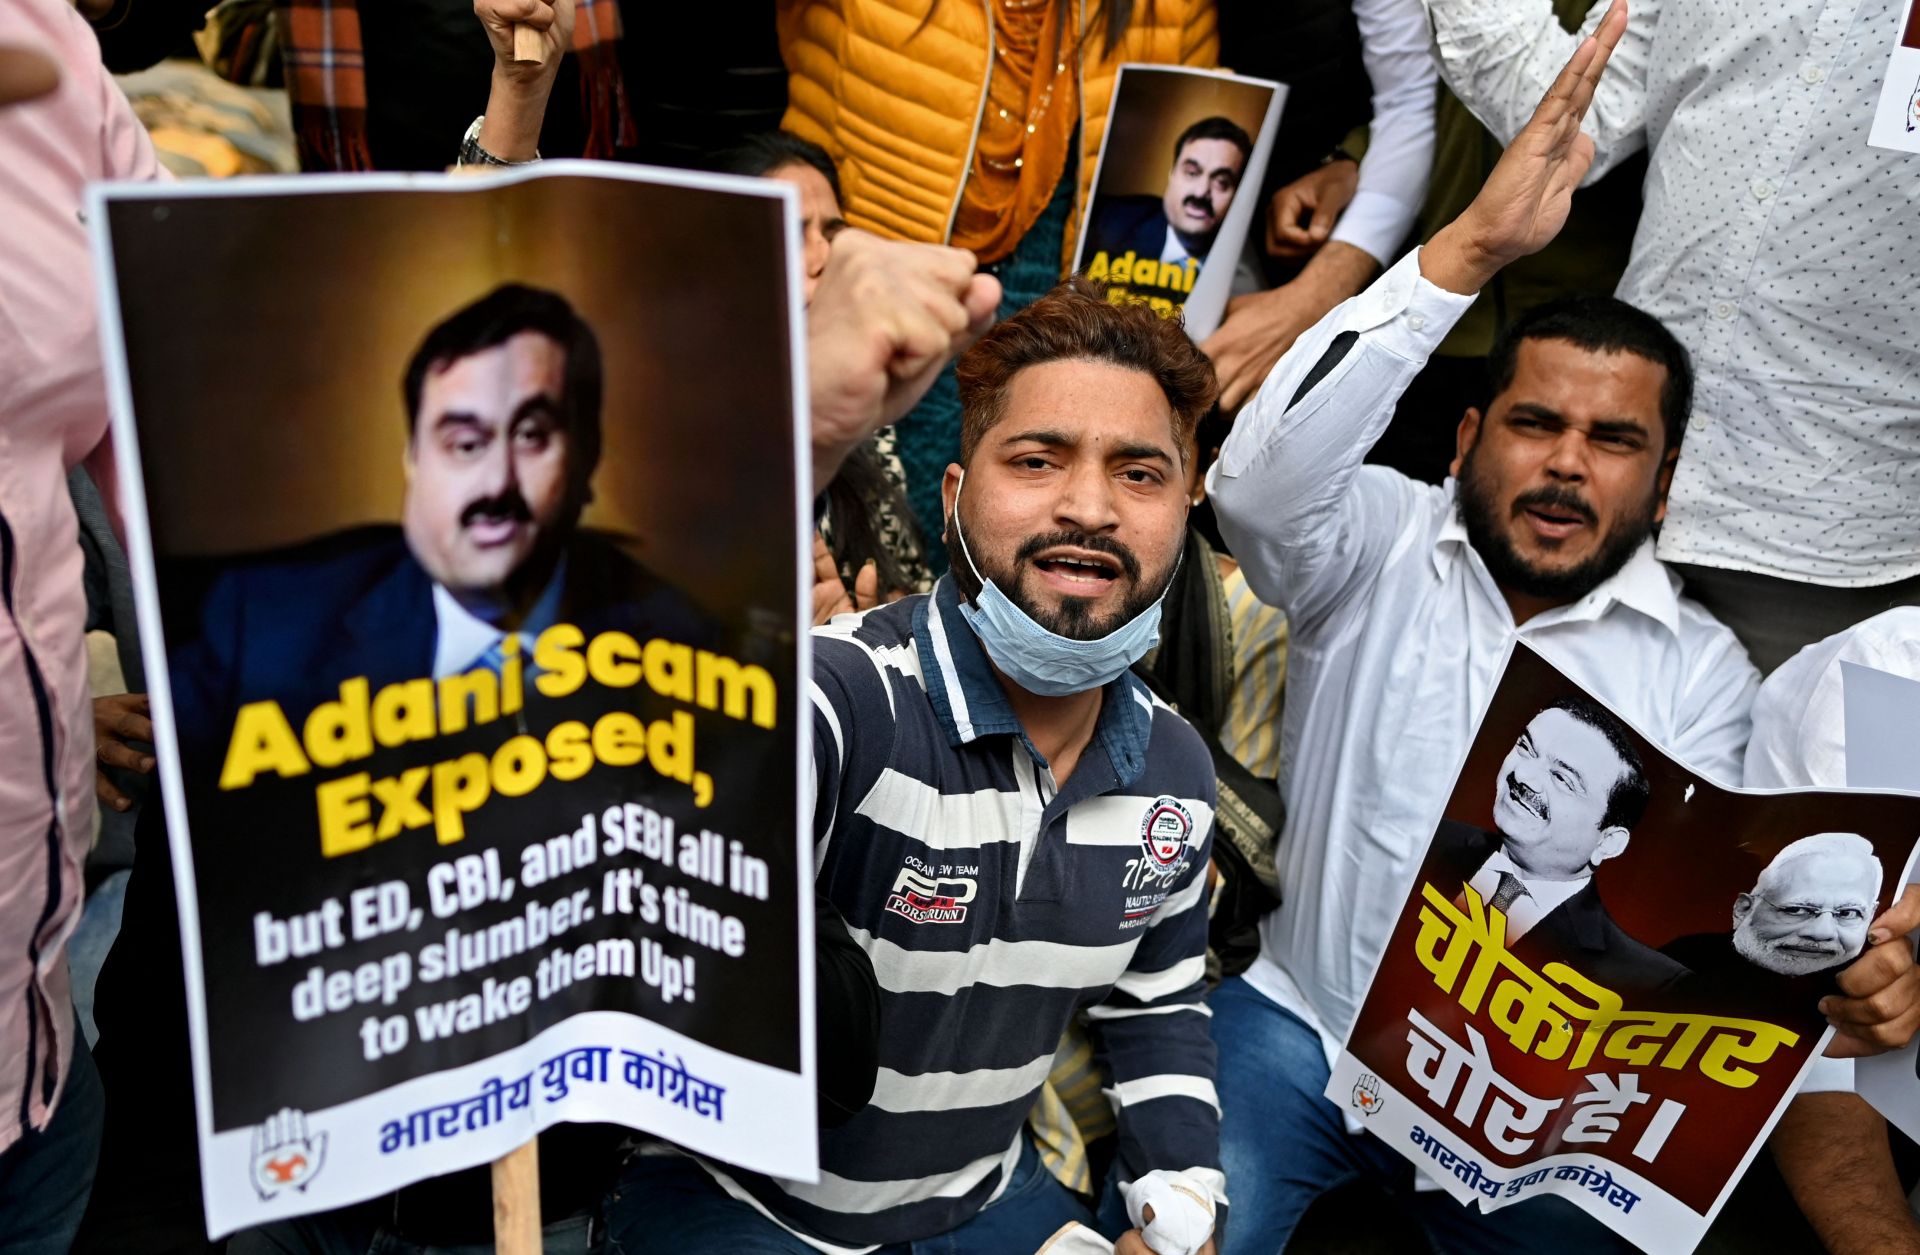 Activists who are part of the youth wing of the opposition Indian National Congress party hold placards and shout slogans during a protest outside the regional headquarters of India's Life Insurance Corporation in New Delhi, India, on Feb. 7, 2023. The protesters are calling for an inquiry into allegations of major accounting fraud at the Adani Group.